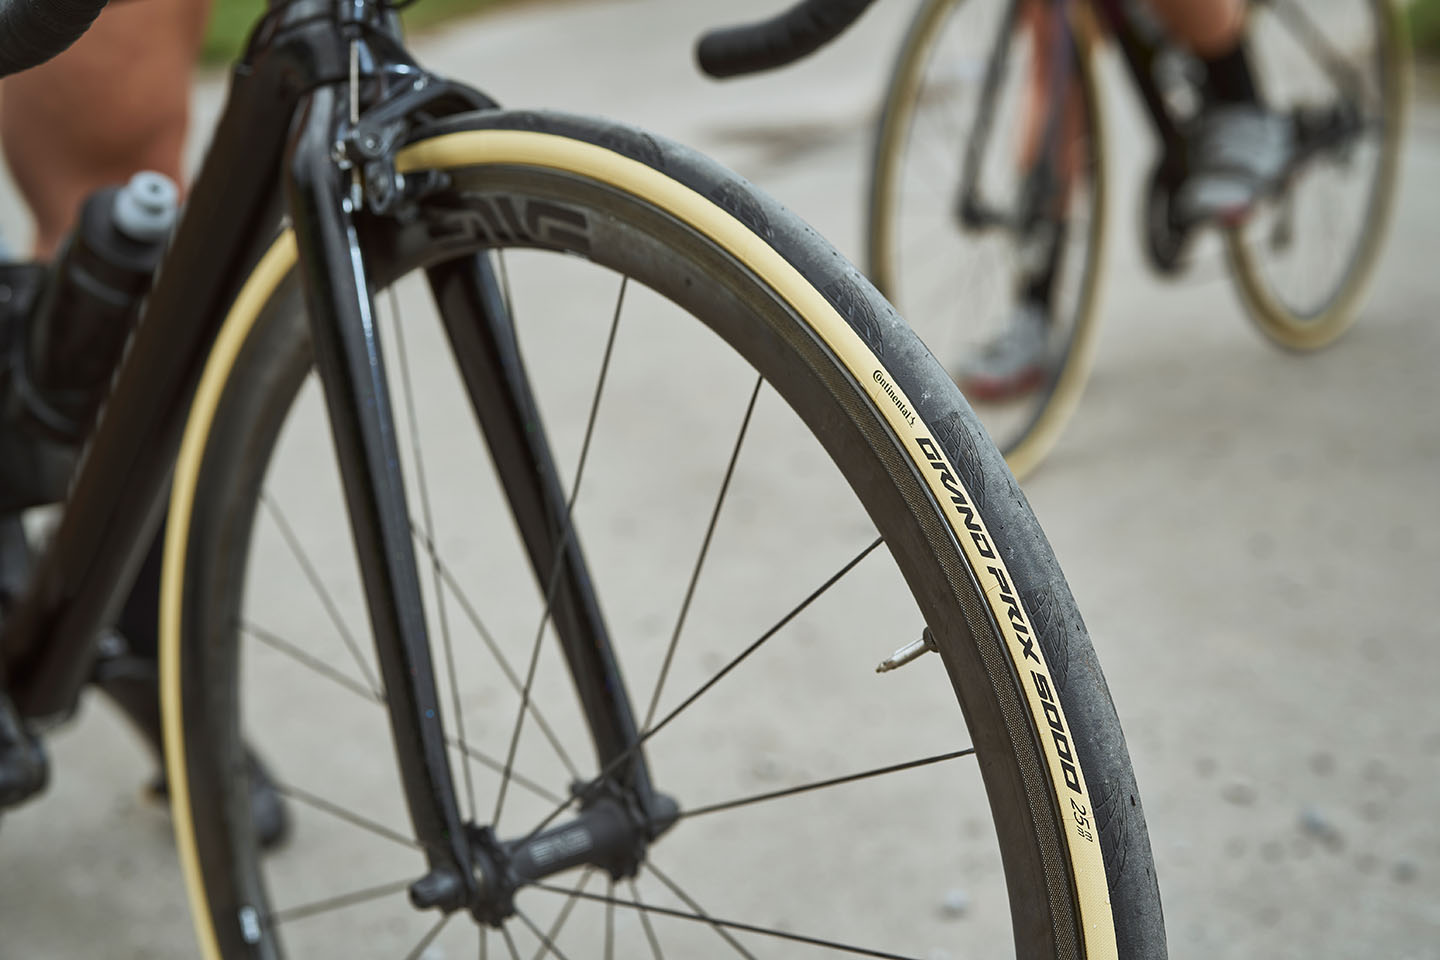 The Grand Prix 5000 cream sidewall tire is back! Continental brings colour  range to the Tour de France - BIKE Magazine